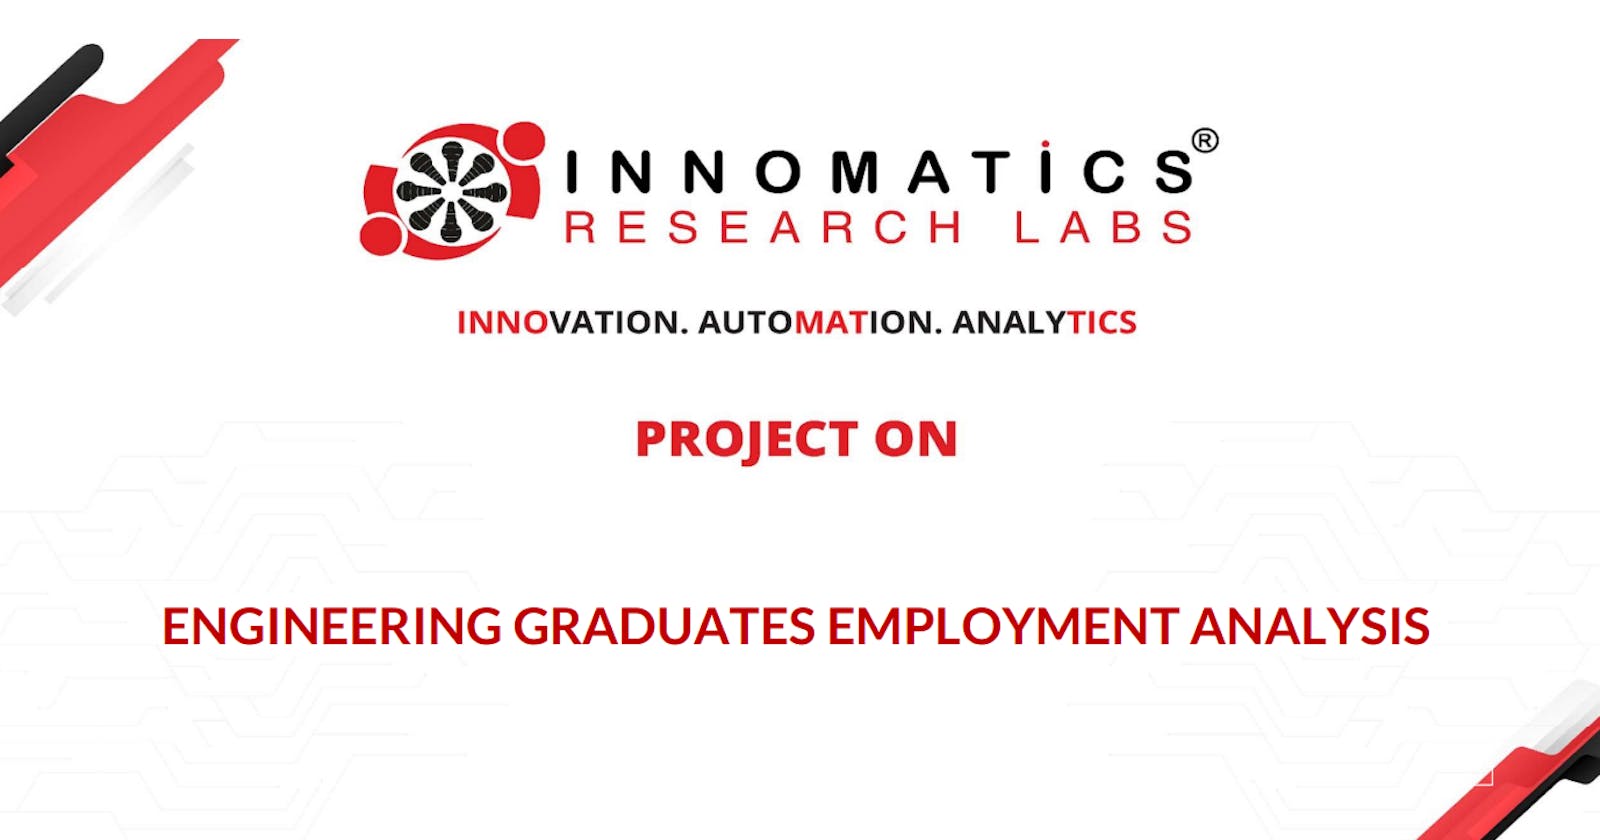 Analyzing Employment Outcomes of Engineering Graduates - A Data-Driven Approach